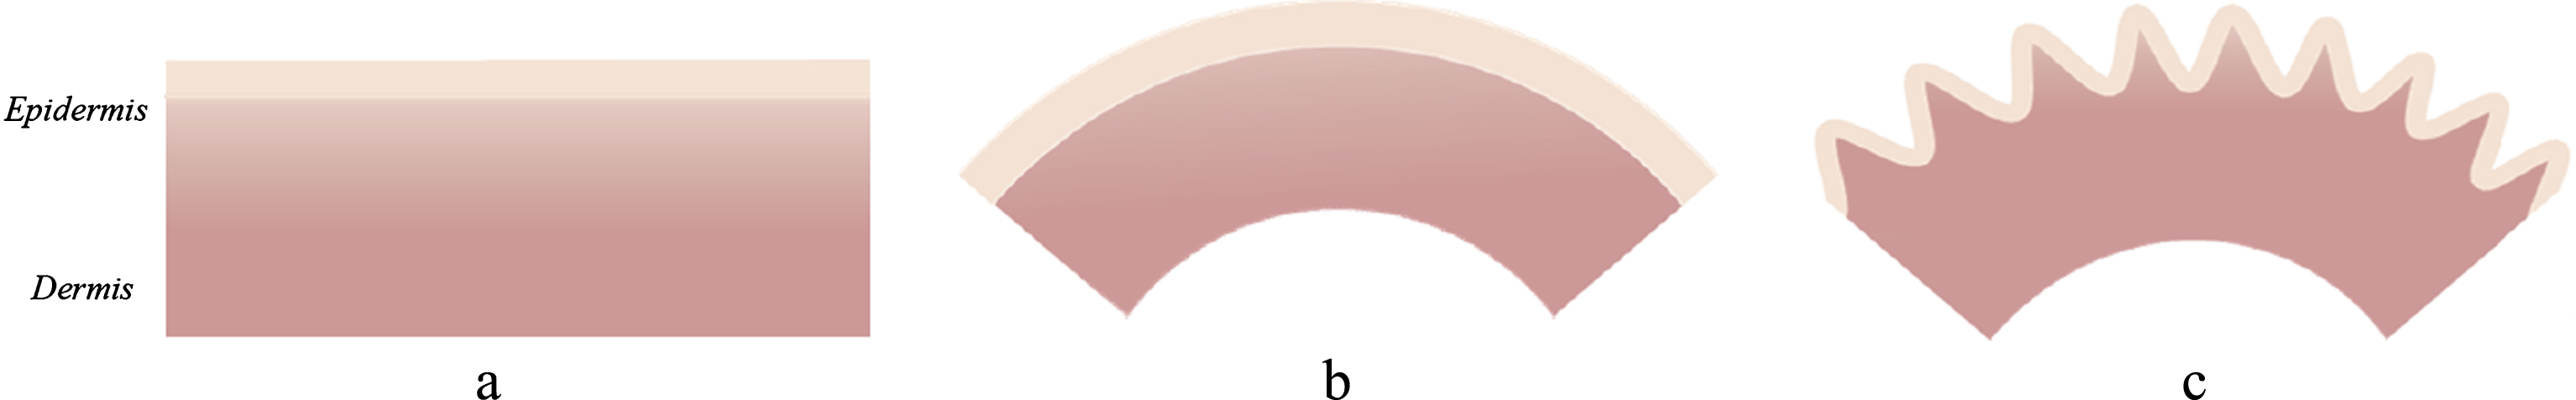 Wrinkling in the bi-layer skin model with bending: a – bi-layer composite epidermis/dermis; b – bending of this composite; c – wrinkling of the bended composite (modified after [55]).